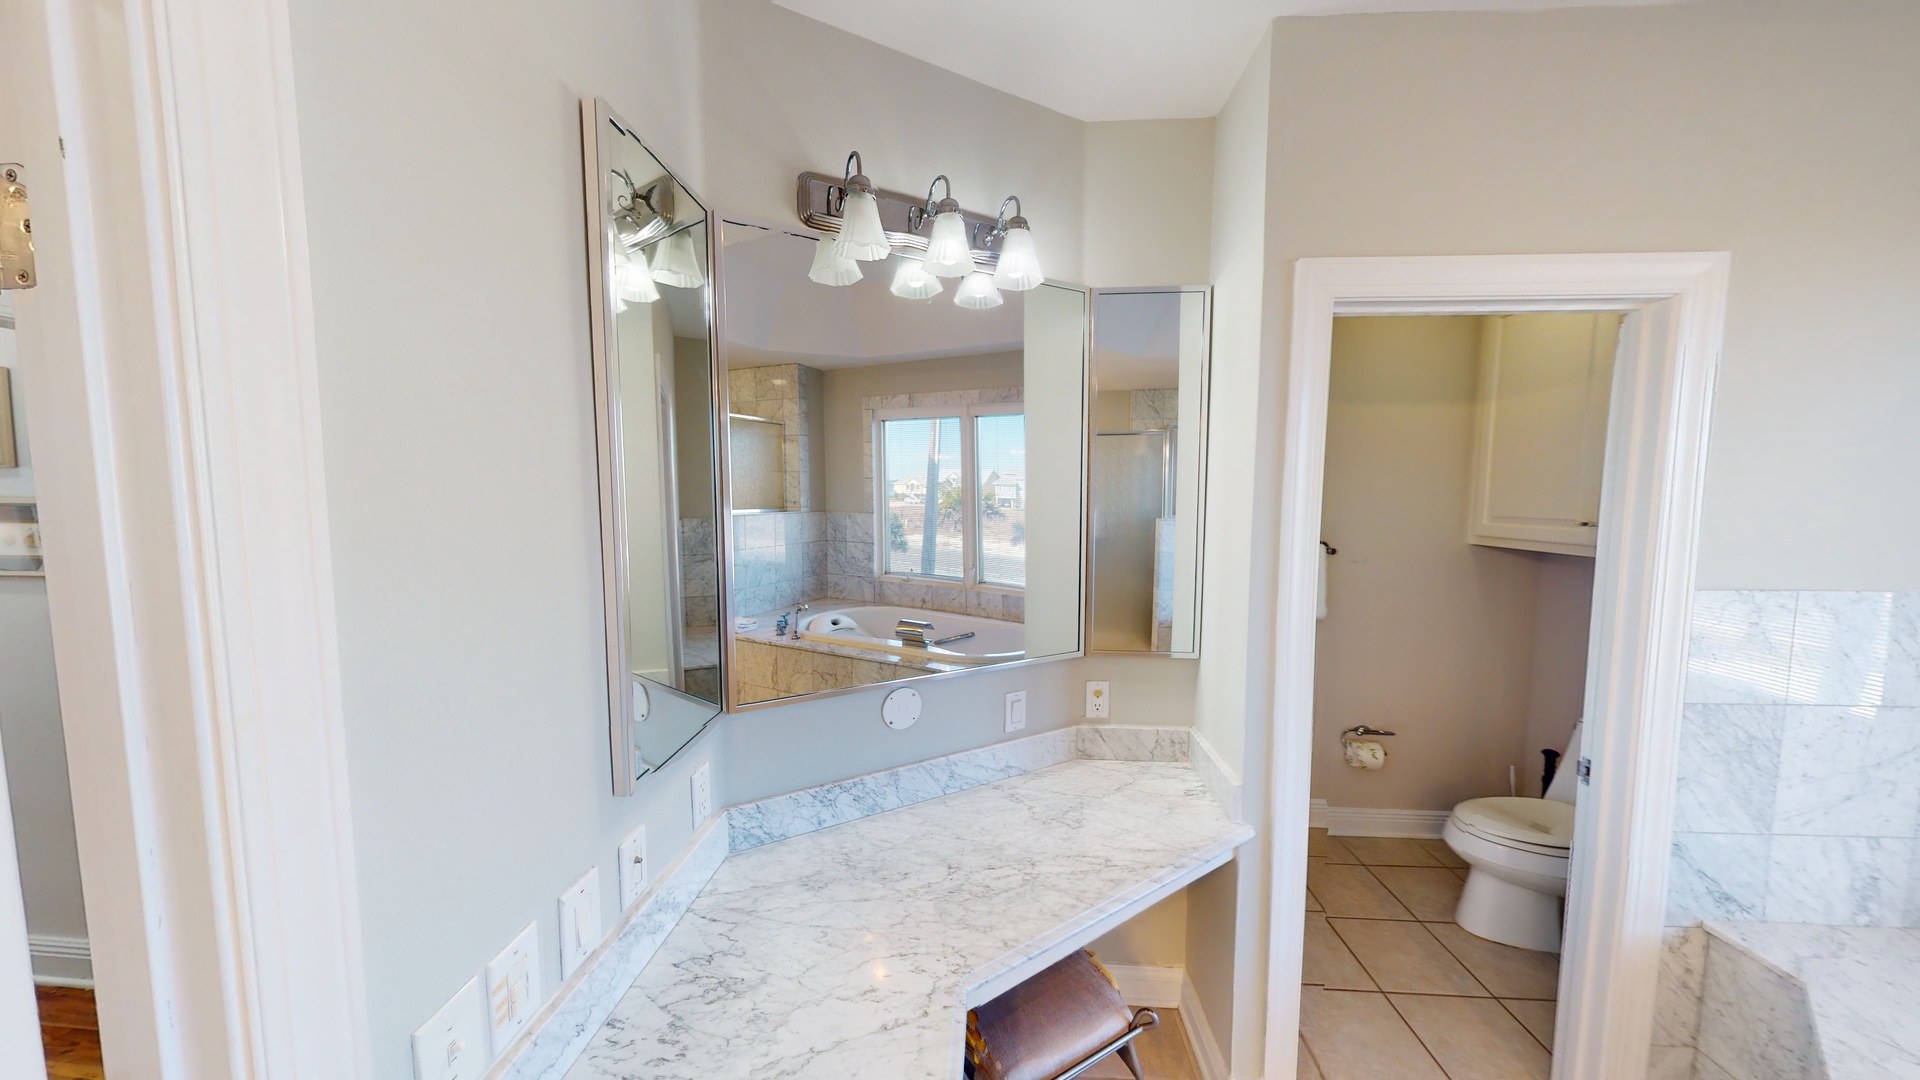 The Master bath has a separate makeup vanity and water closet